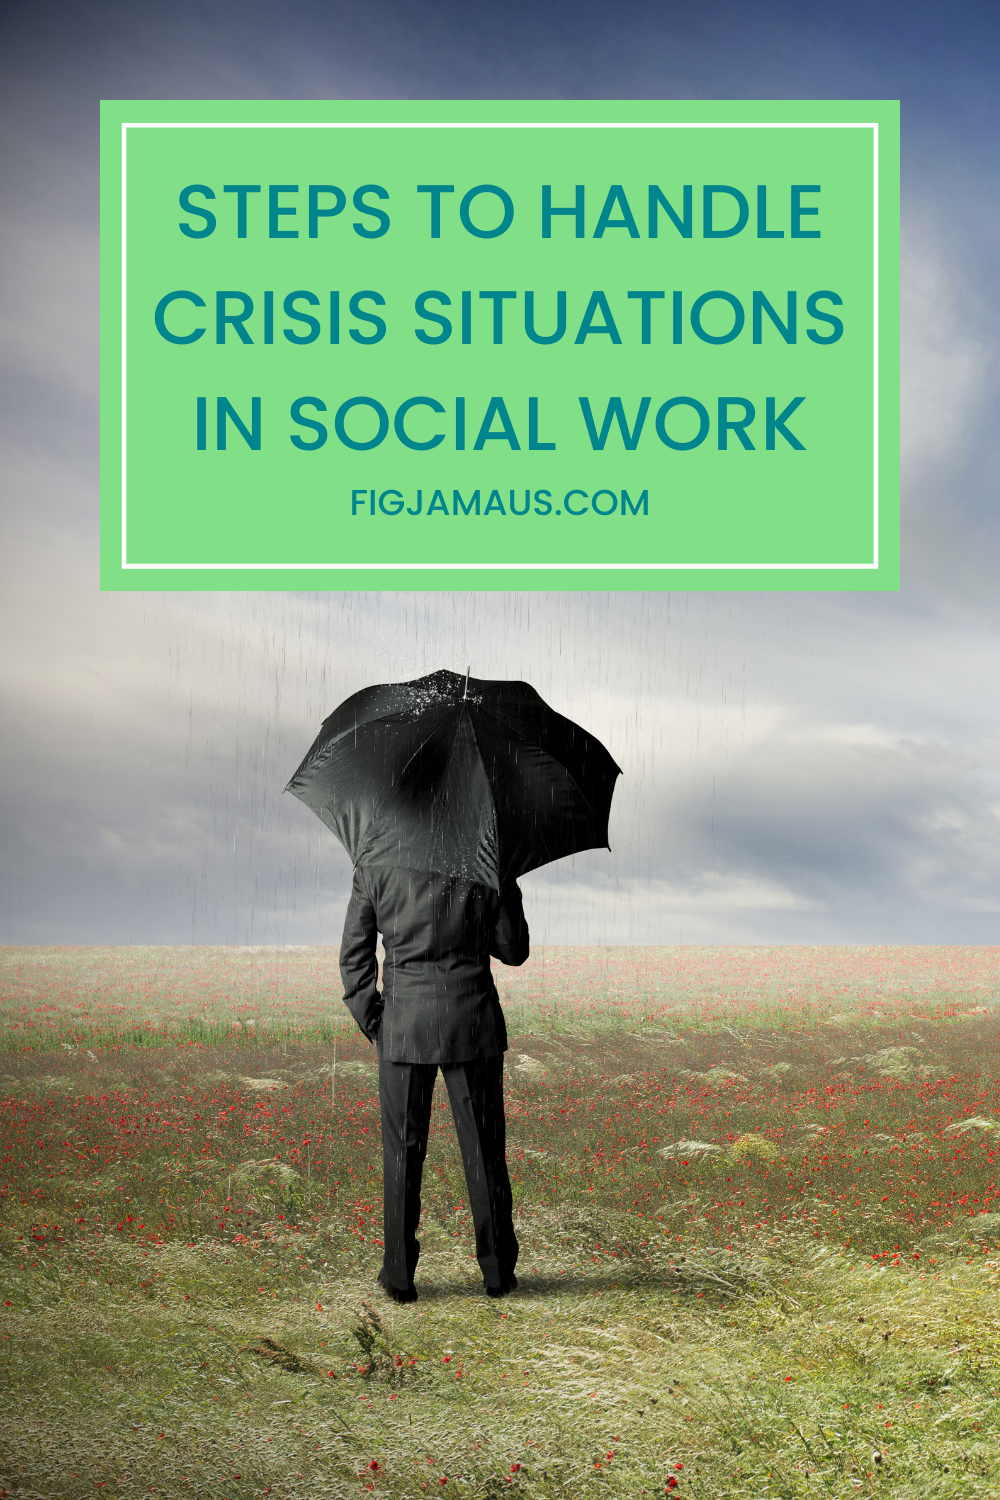 Steps to handle crisis situations in social work